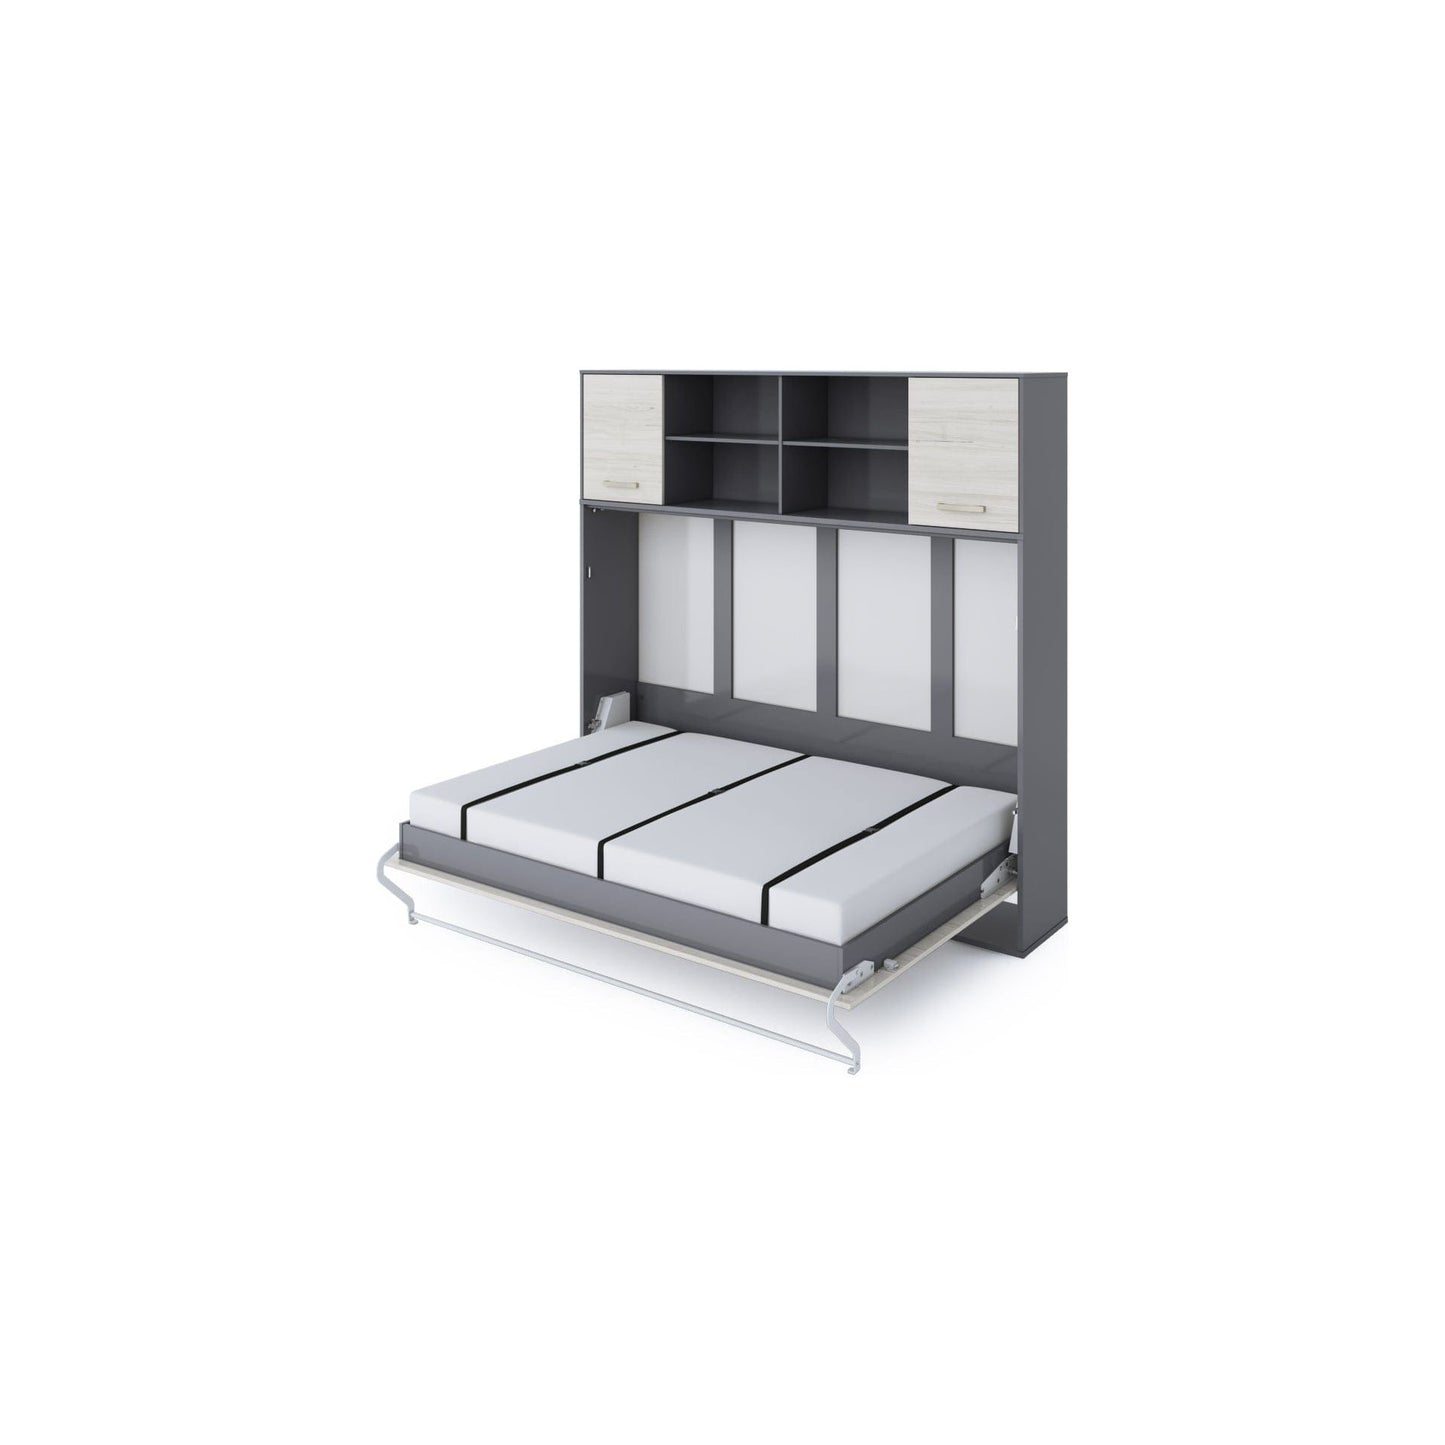 Maxima House Maxima House Invento Horizontal Wall Bed, European Full Size with a cabinet on top